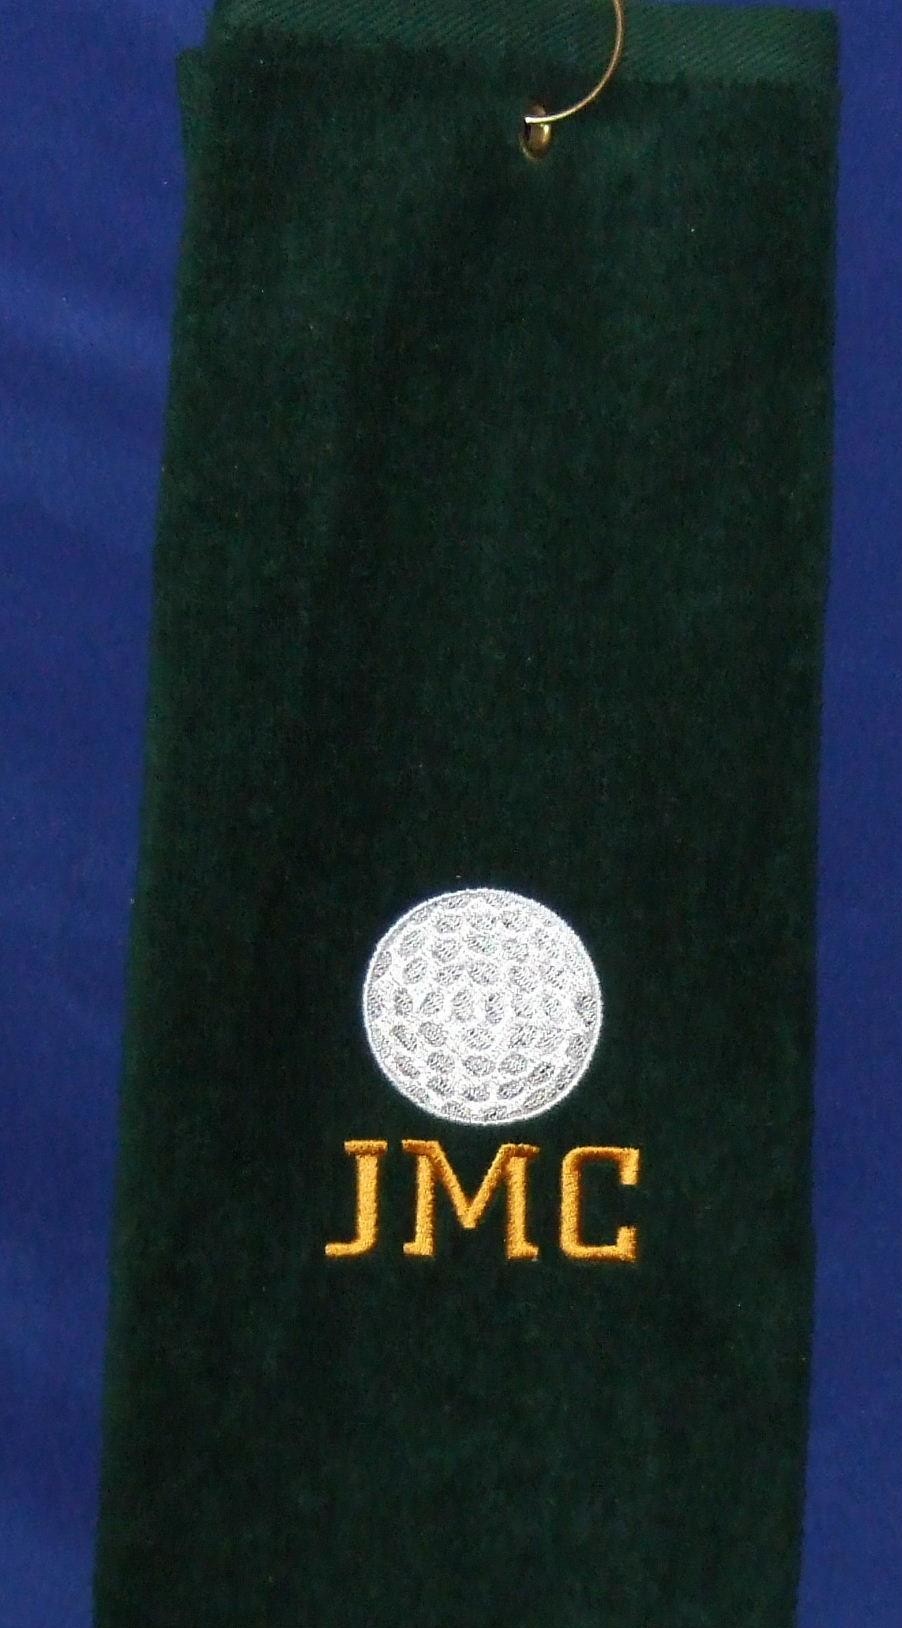 Personalized golf towel